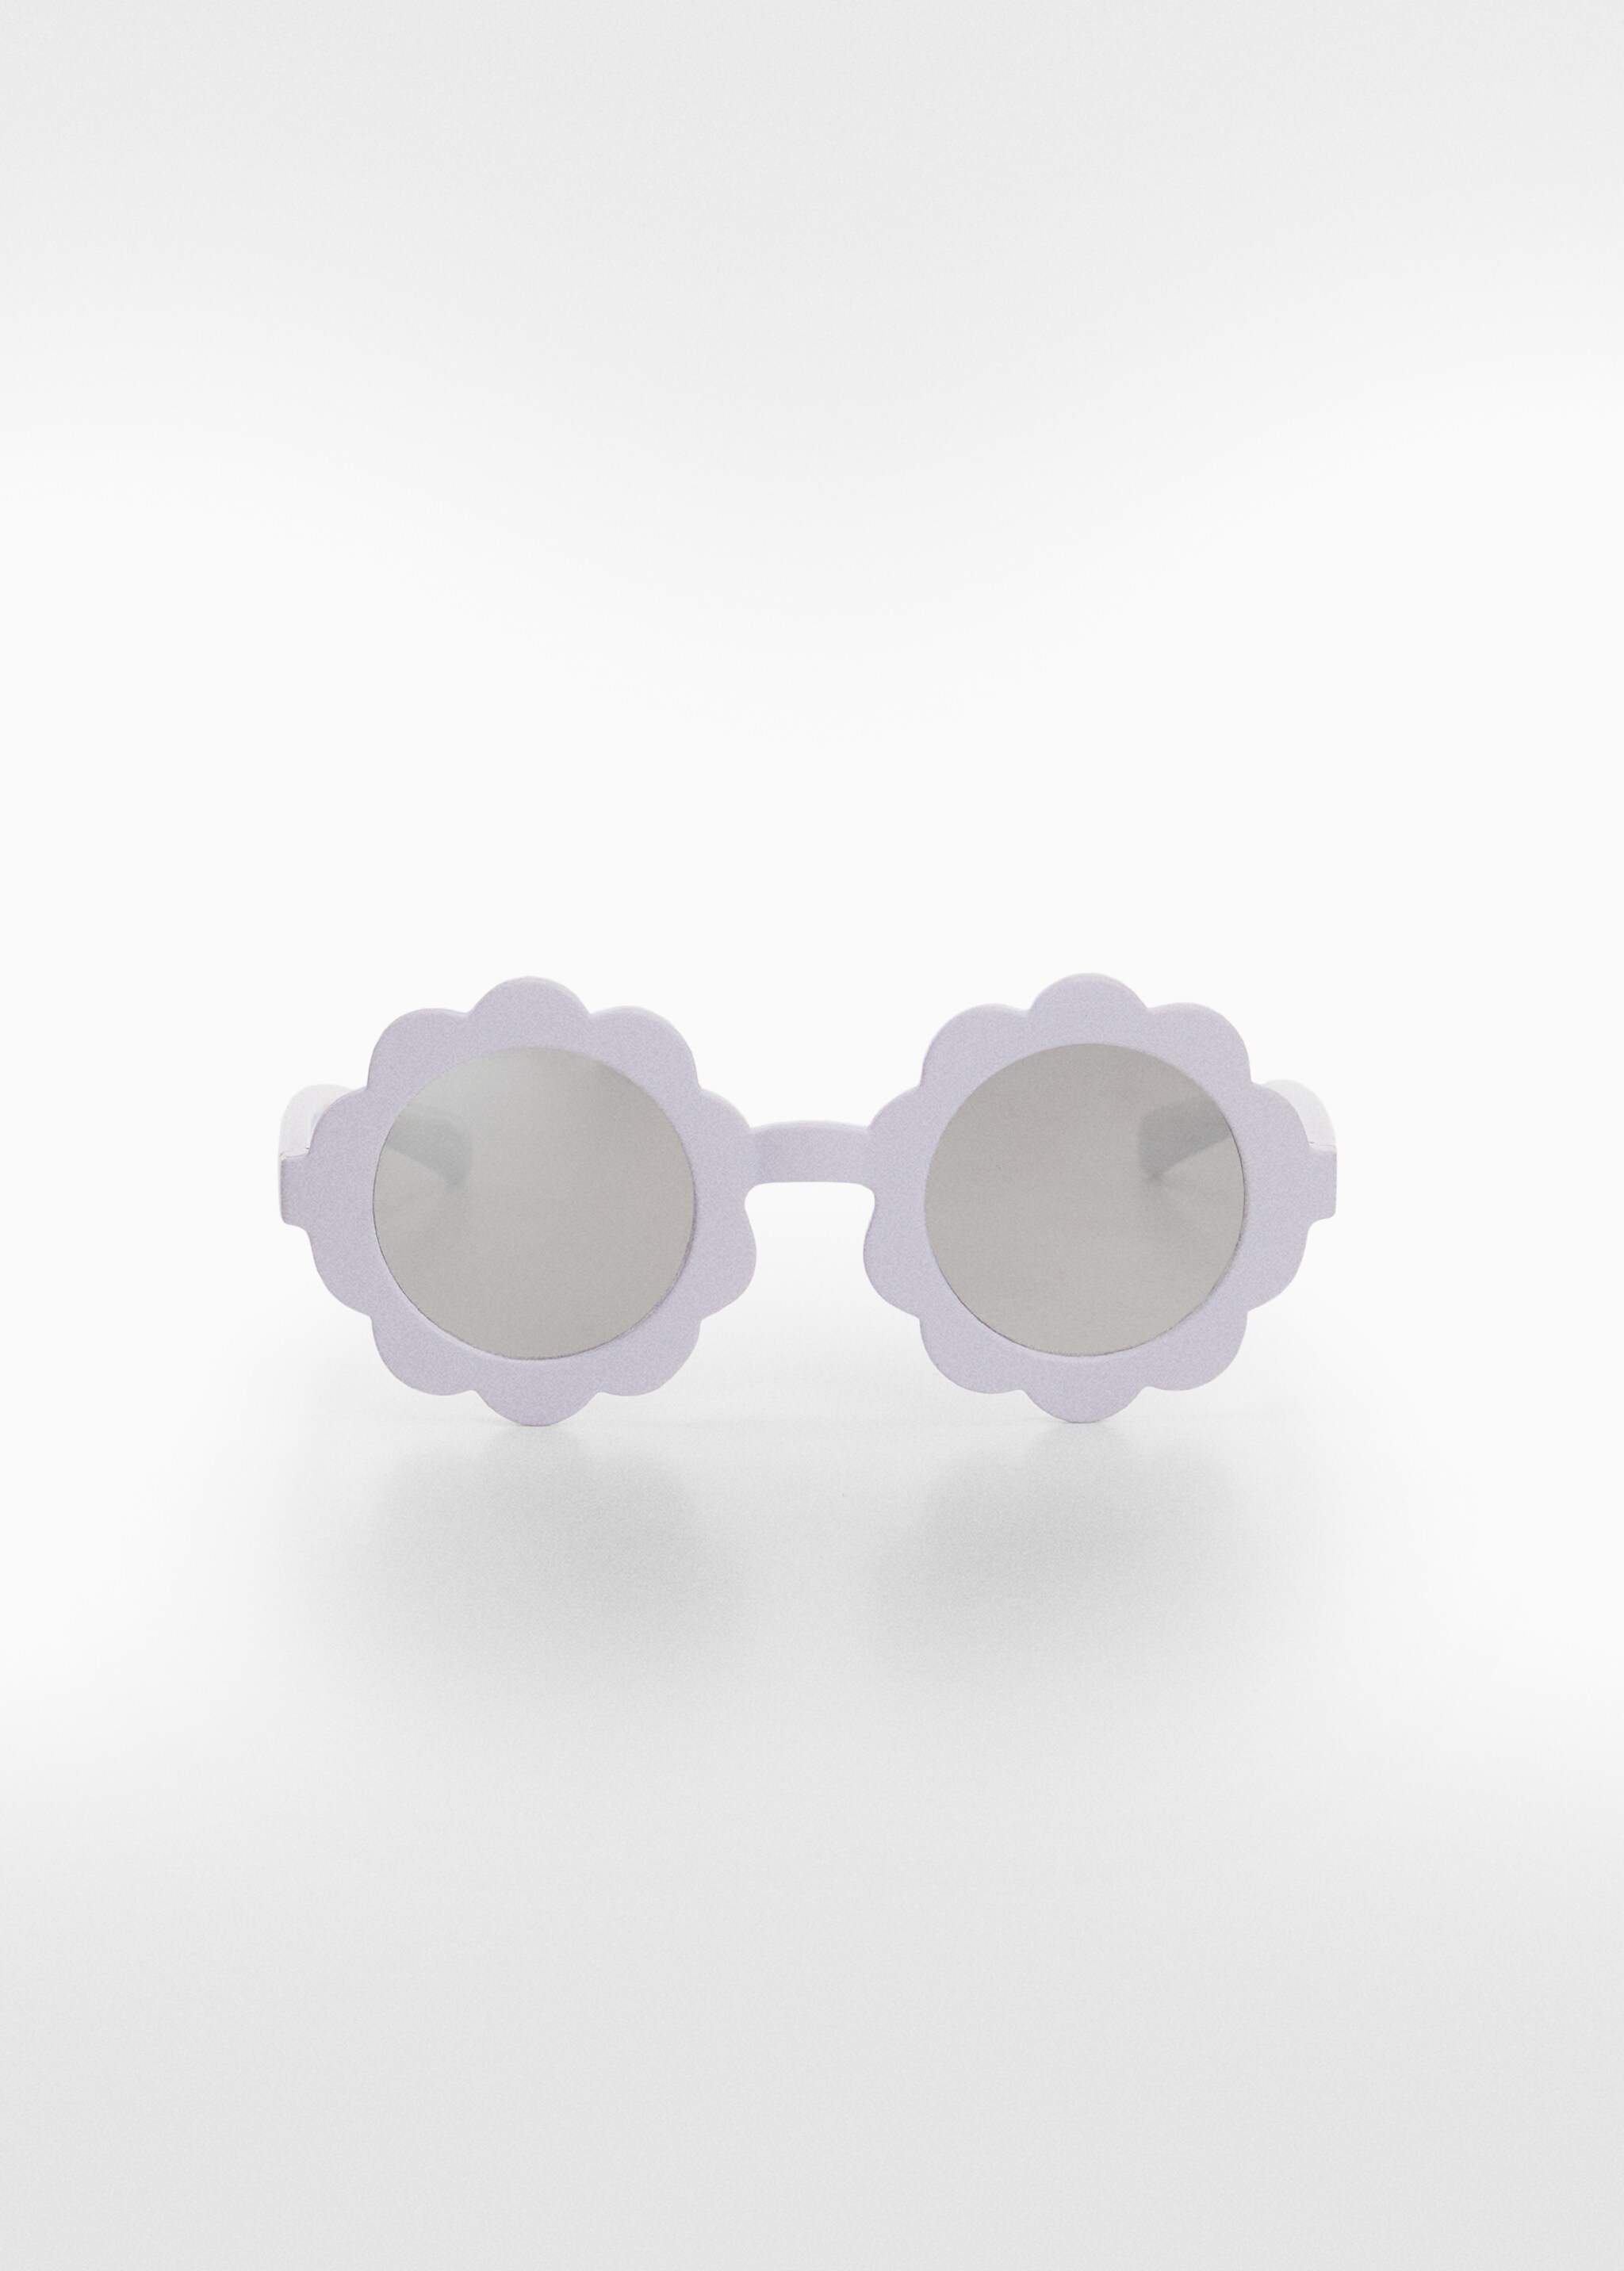 Flower sunglasses - Article without model